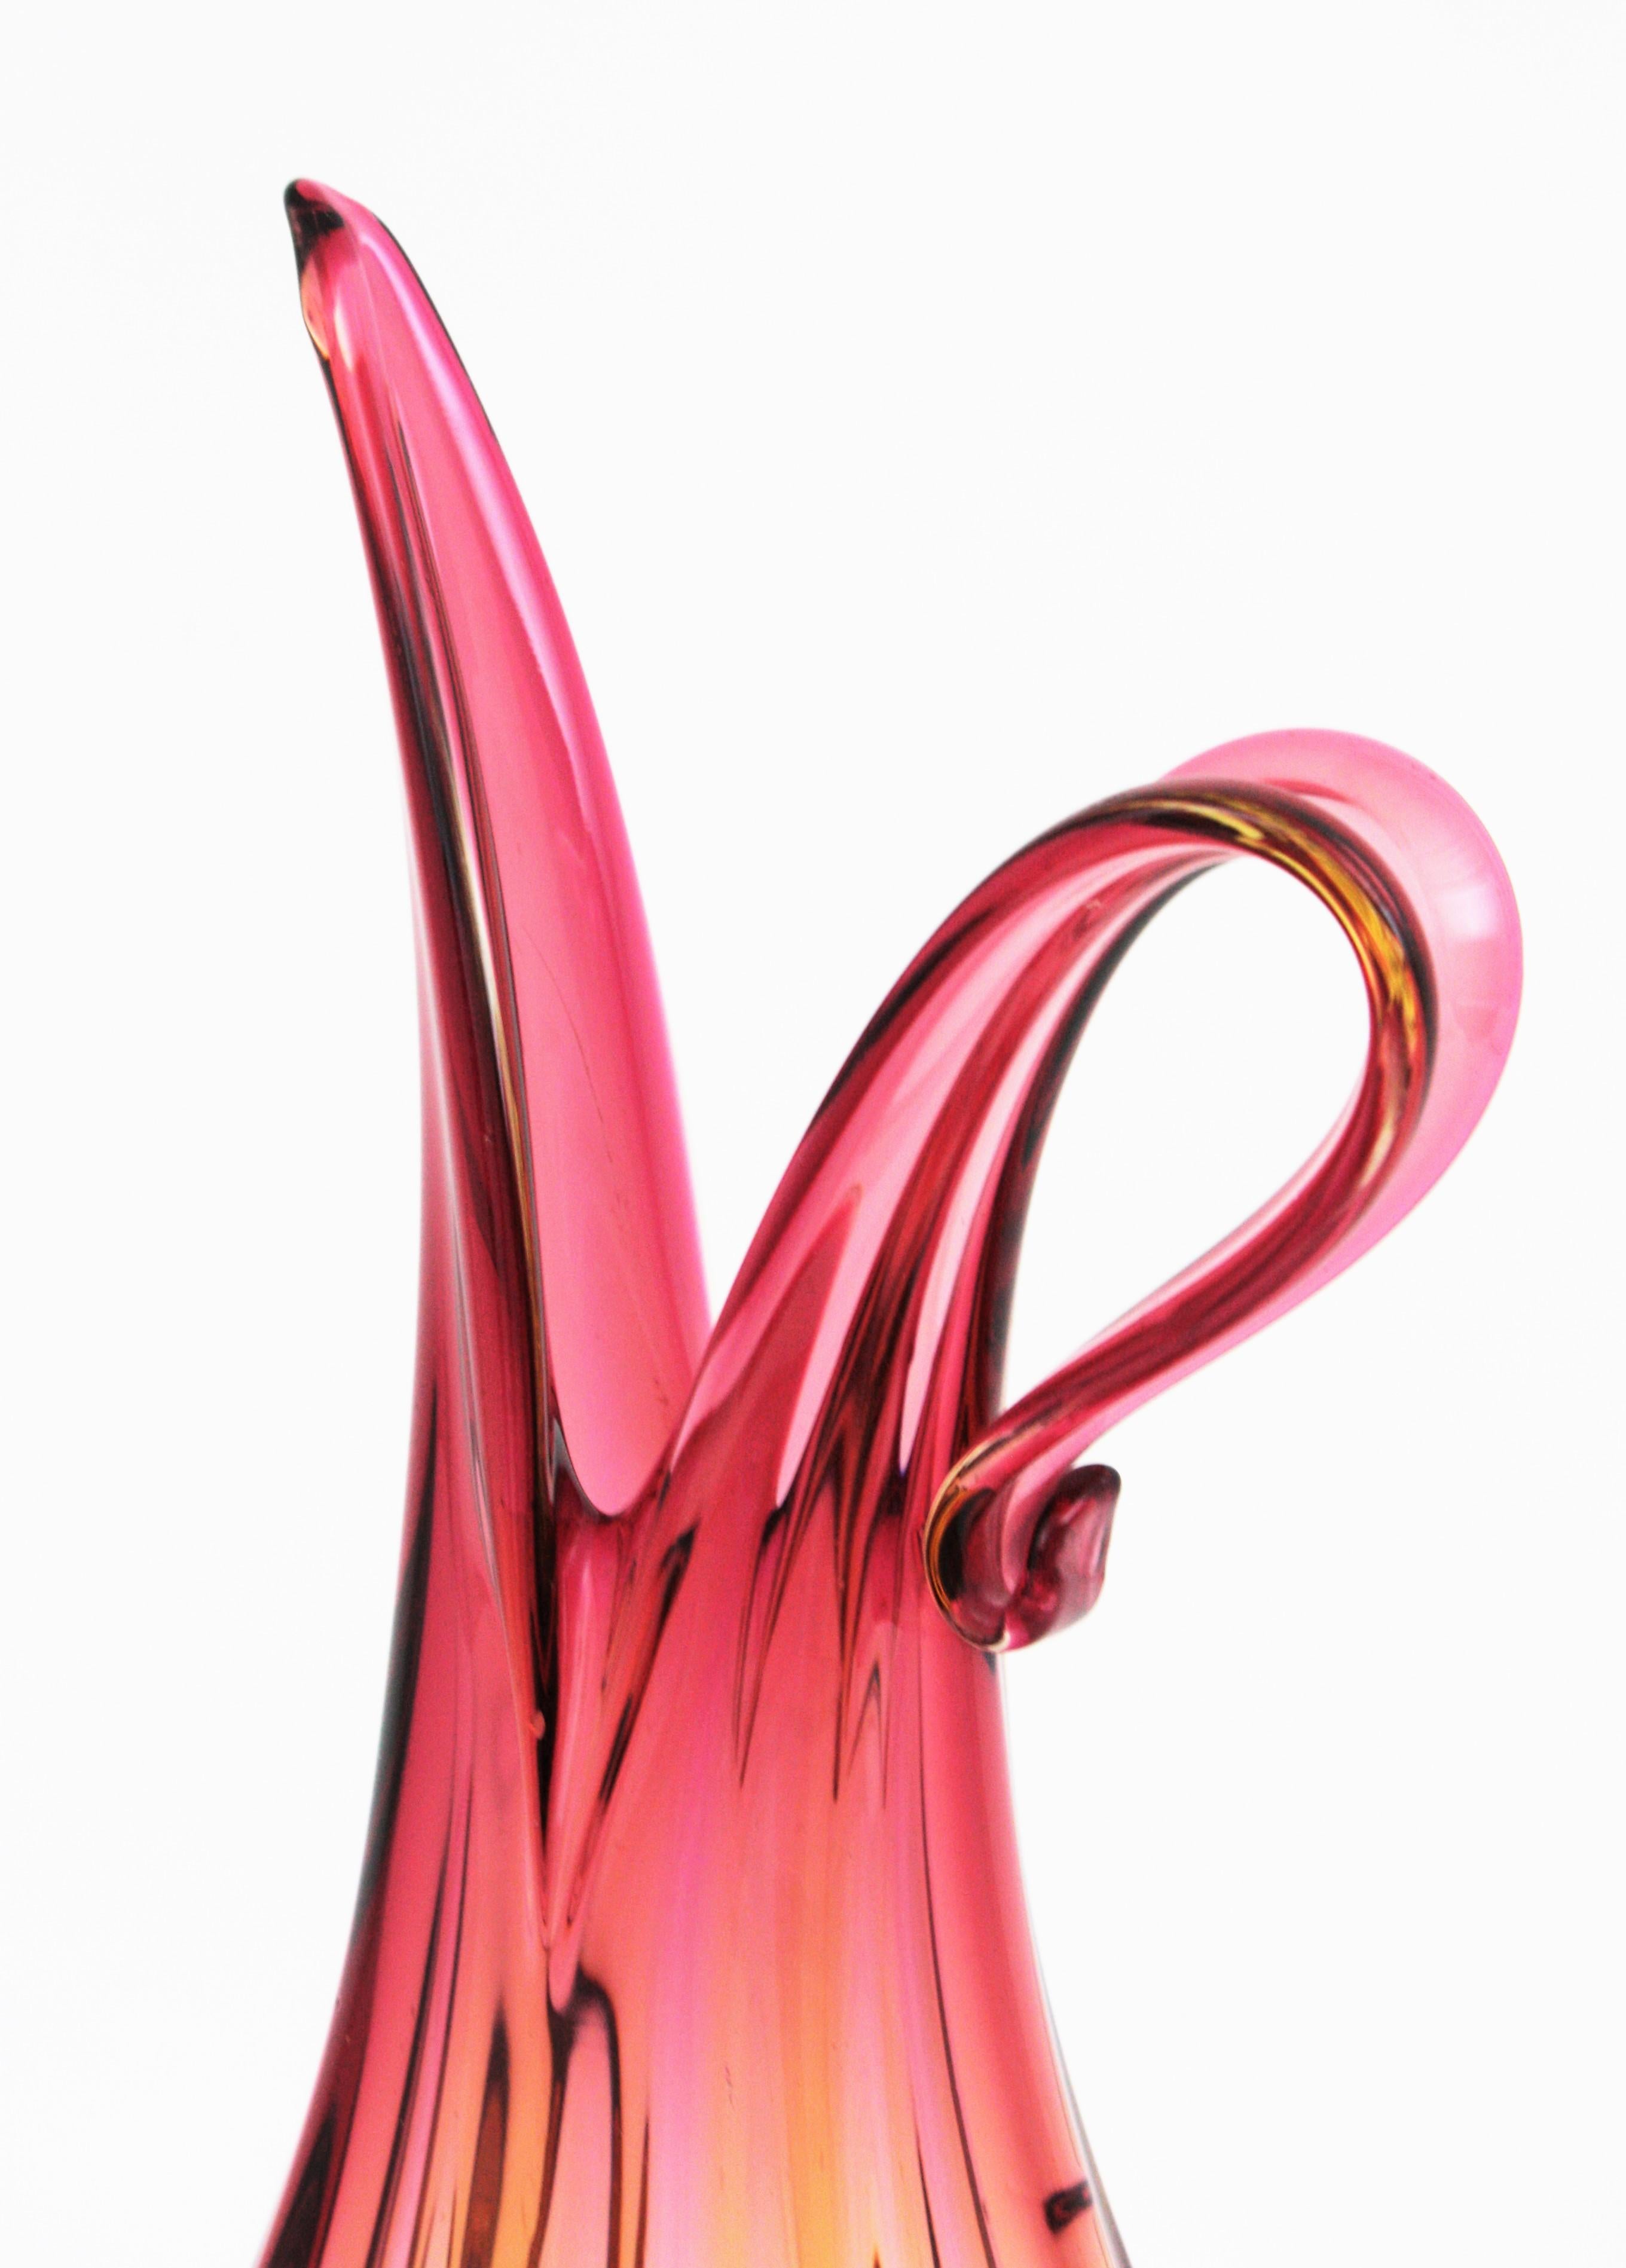 Mid-Century Modern Flavio Poli Seguso Murano Pink Amber Sommerso Ribbed Art Glass Vase, 1950s For Sale